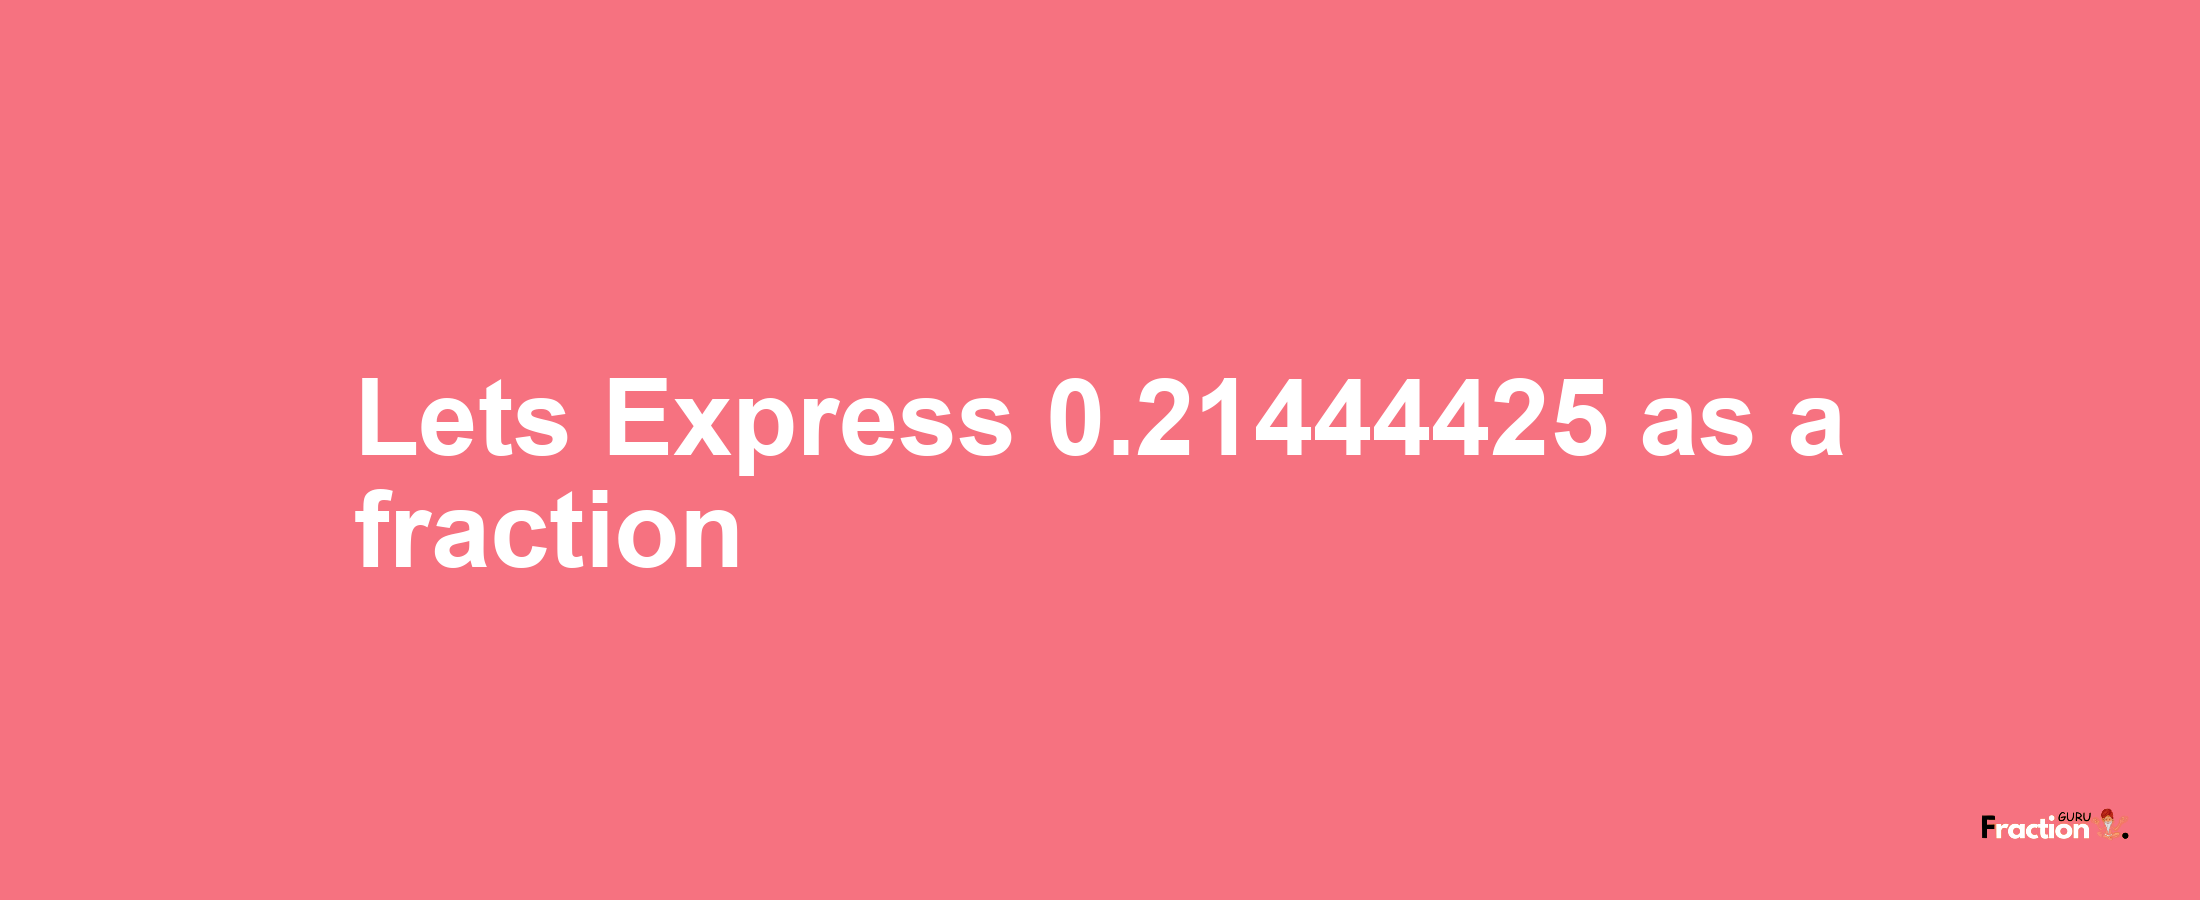 Lets Express 0.21444425 as afraction